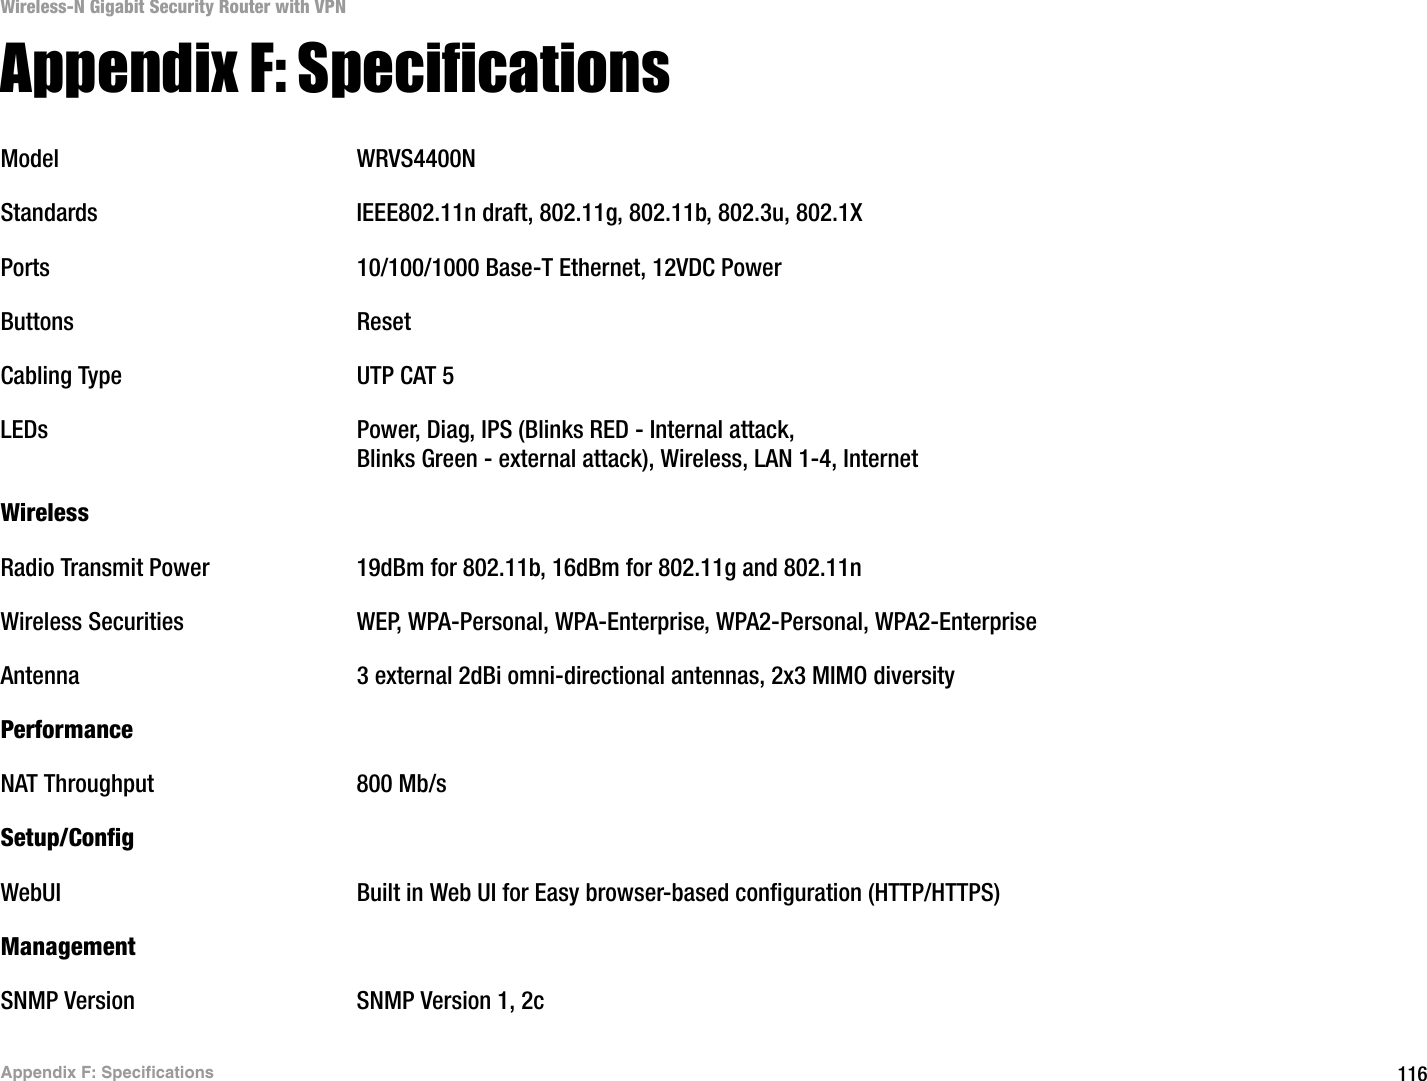 116Appendix F: SpecificationsWireless-N Gigabit Security Router with VPNAppendix F: SpecificationsModel WRVS4400NStandards IEEE802.11n draft, 802.11g, 802.11b, 802.3u, 802.1XPorts 10/100/1000 Base-T Ethernet, 12VDC PowerButtons ResetCabling Type UTP CAT 5 LEDs Power, Diag, IPS (Blinks RED - Internal attack, Blinks Green - external attack), Wireless, LAN 1-4, Internet WirelessRadio Transmit Power 19dBm for 802.11b, 16dBm for 802.11g and 802.11nWireless Securities WEP, WPA-Personal, WPA-Enterprise, WPA2-Personal, WPA2-EnterpriseAntenna 3 external 2dBi omni-directional antennas, 2x3 MIMO diversityPerformanceNAT Throughput 800 Mb/sSetup/ConfigWebUI Built in Web UI for Easy browser-based configuration (HTTP/HTTPS)ManagementSNMP Version SNMP Version 1, 2c